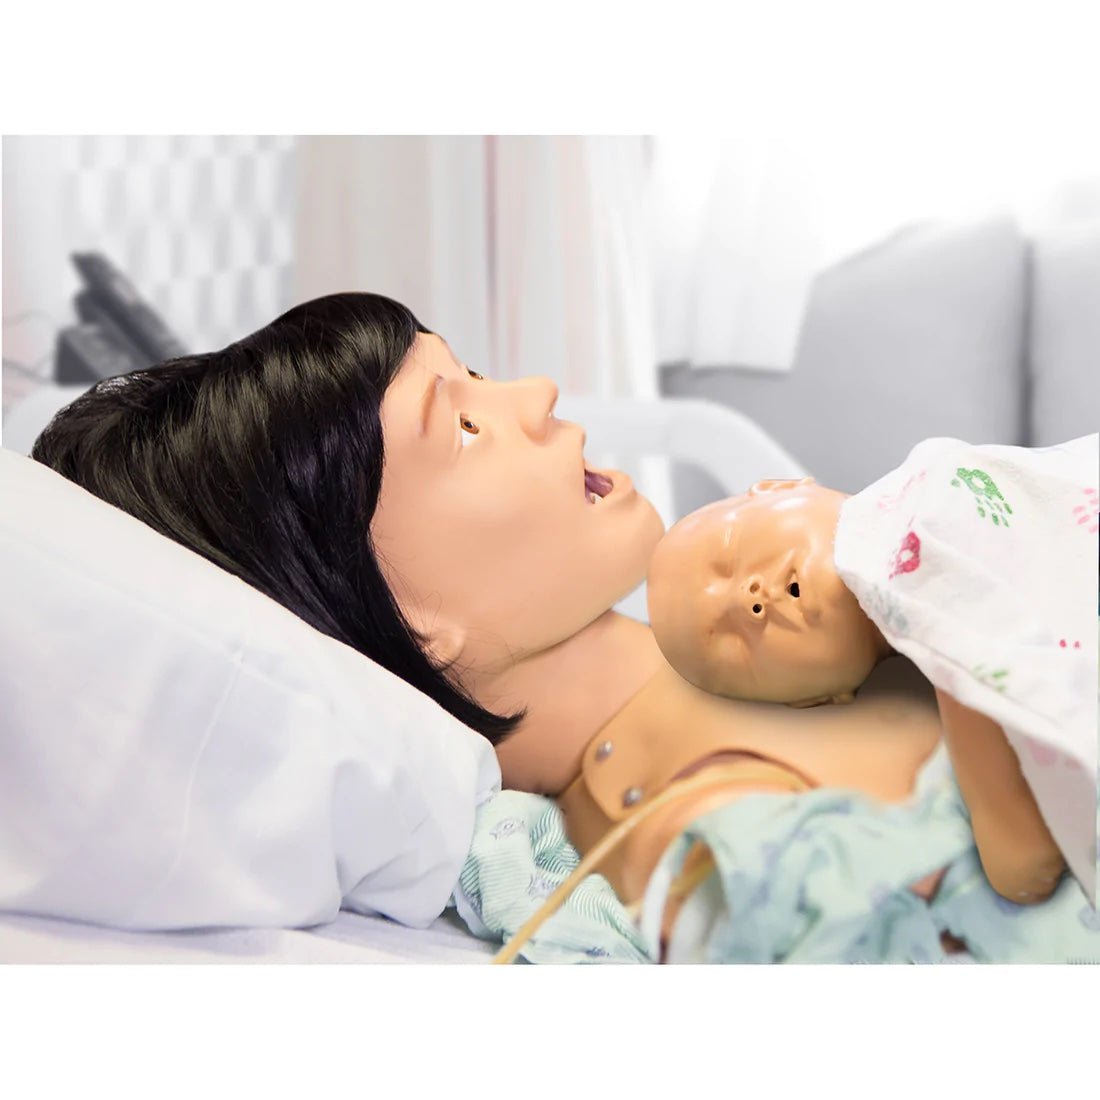 The Complete Lucy Maternal and Neonatal Birthing Simulator for Medical Training - American Hospital Supply